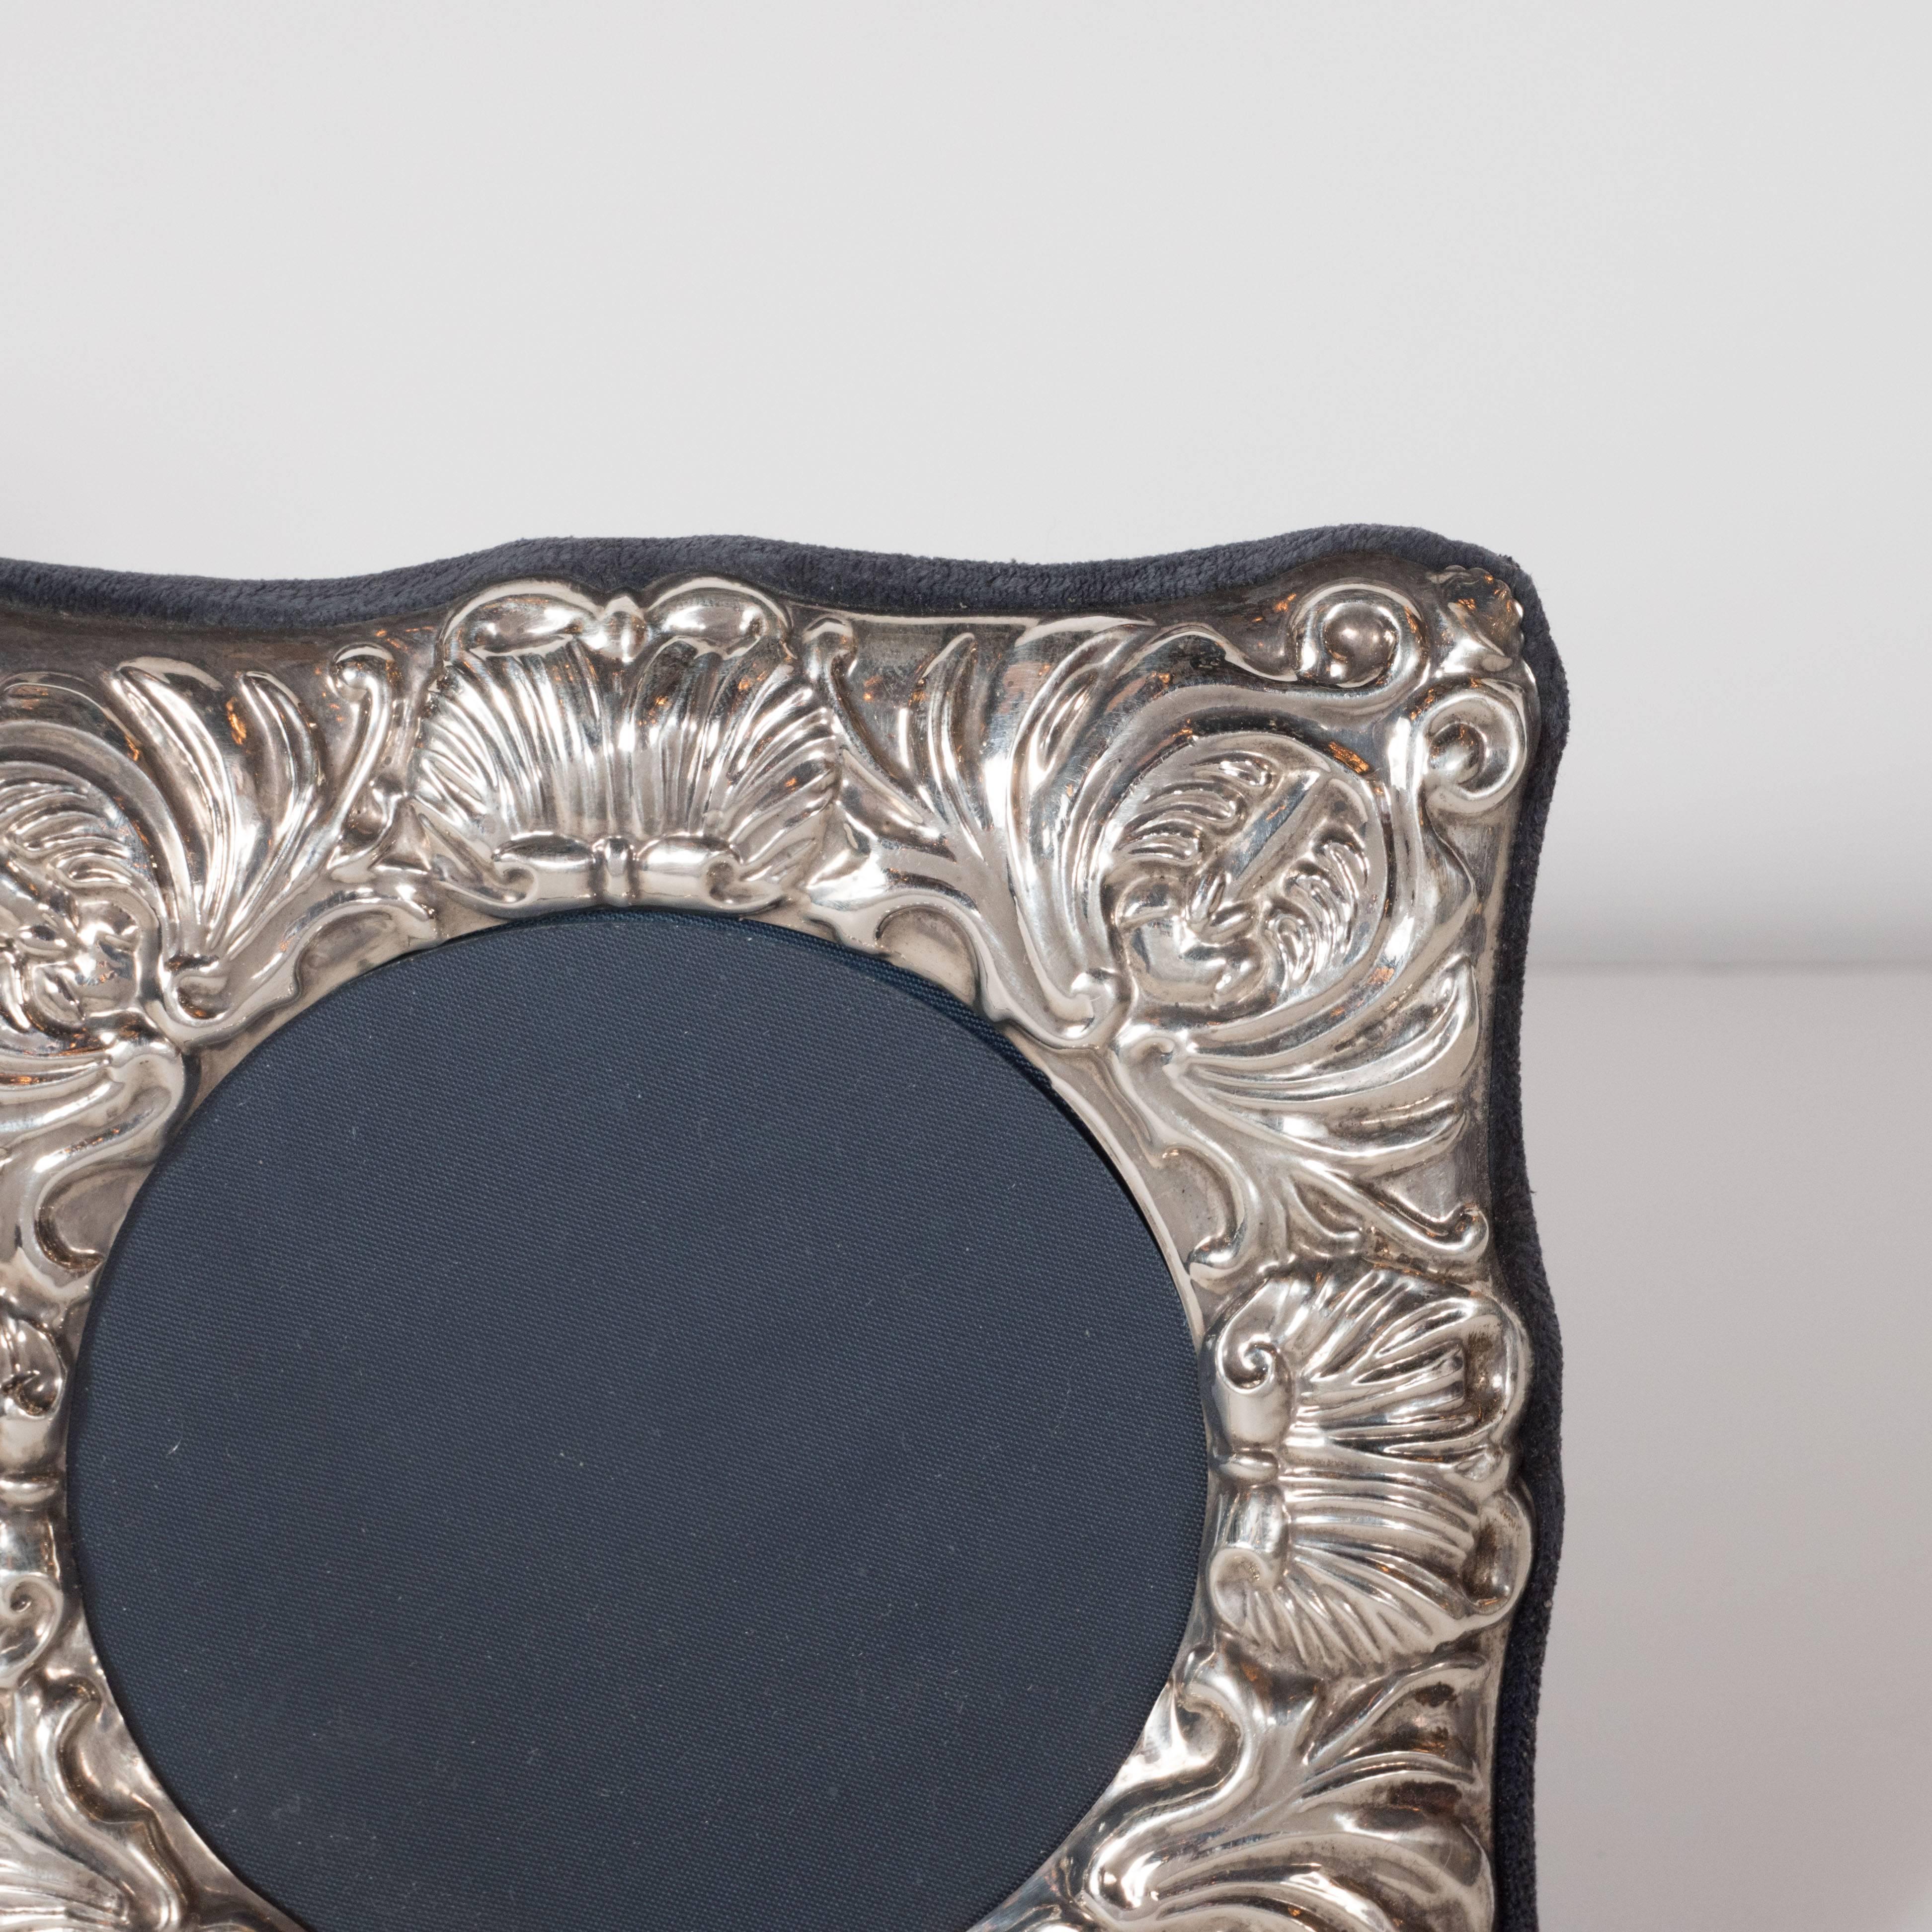 English 19th Century British Sterling Silver Picture Frame with Repoussé Baroque Designs